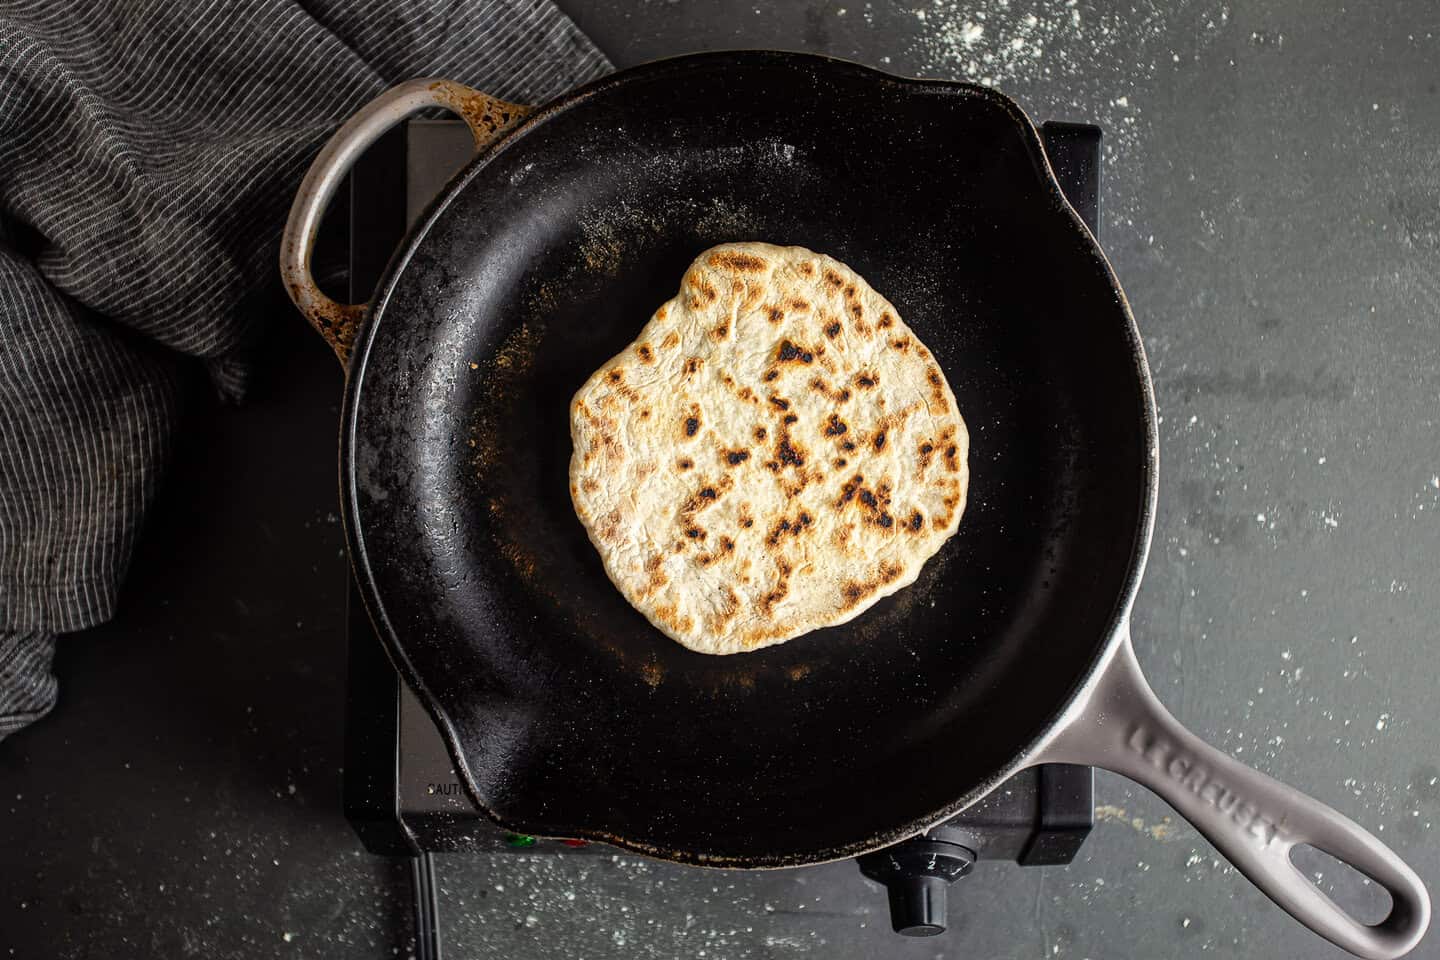 Cooking homemade pita bread on an enameled cast iron skillet.